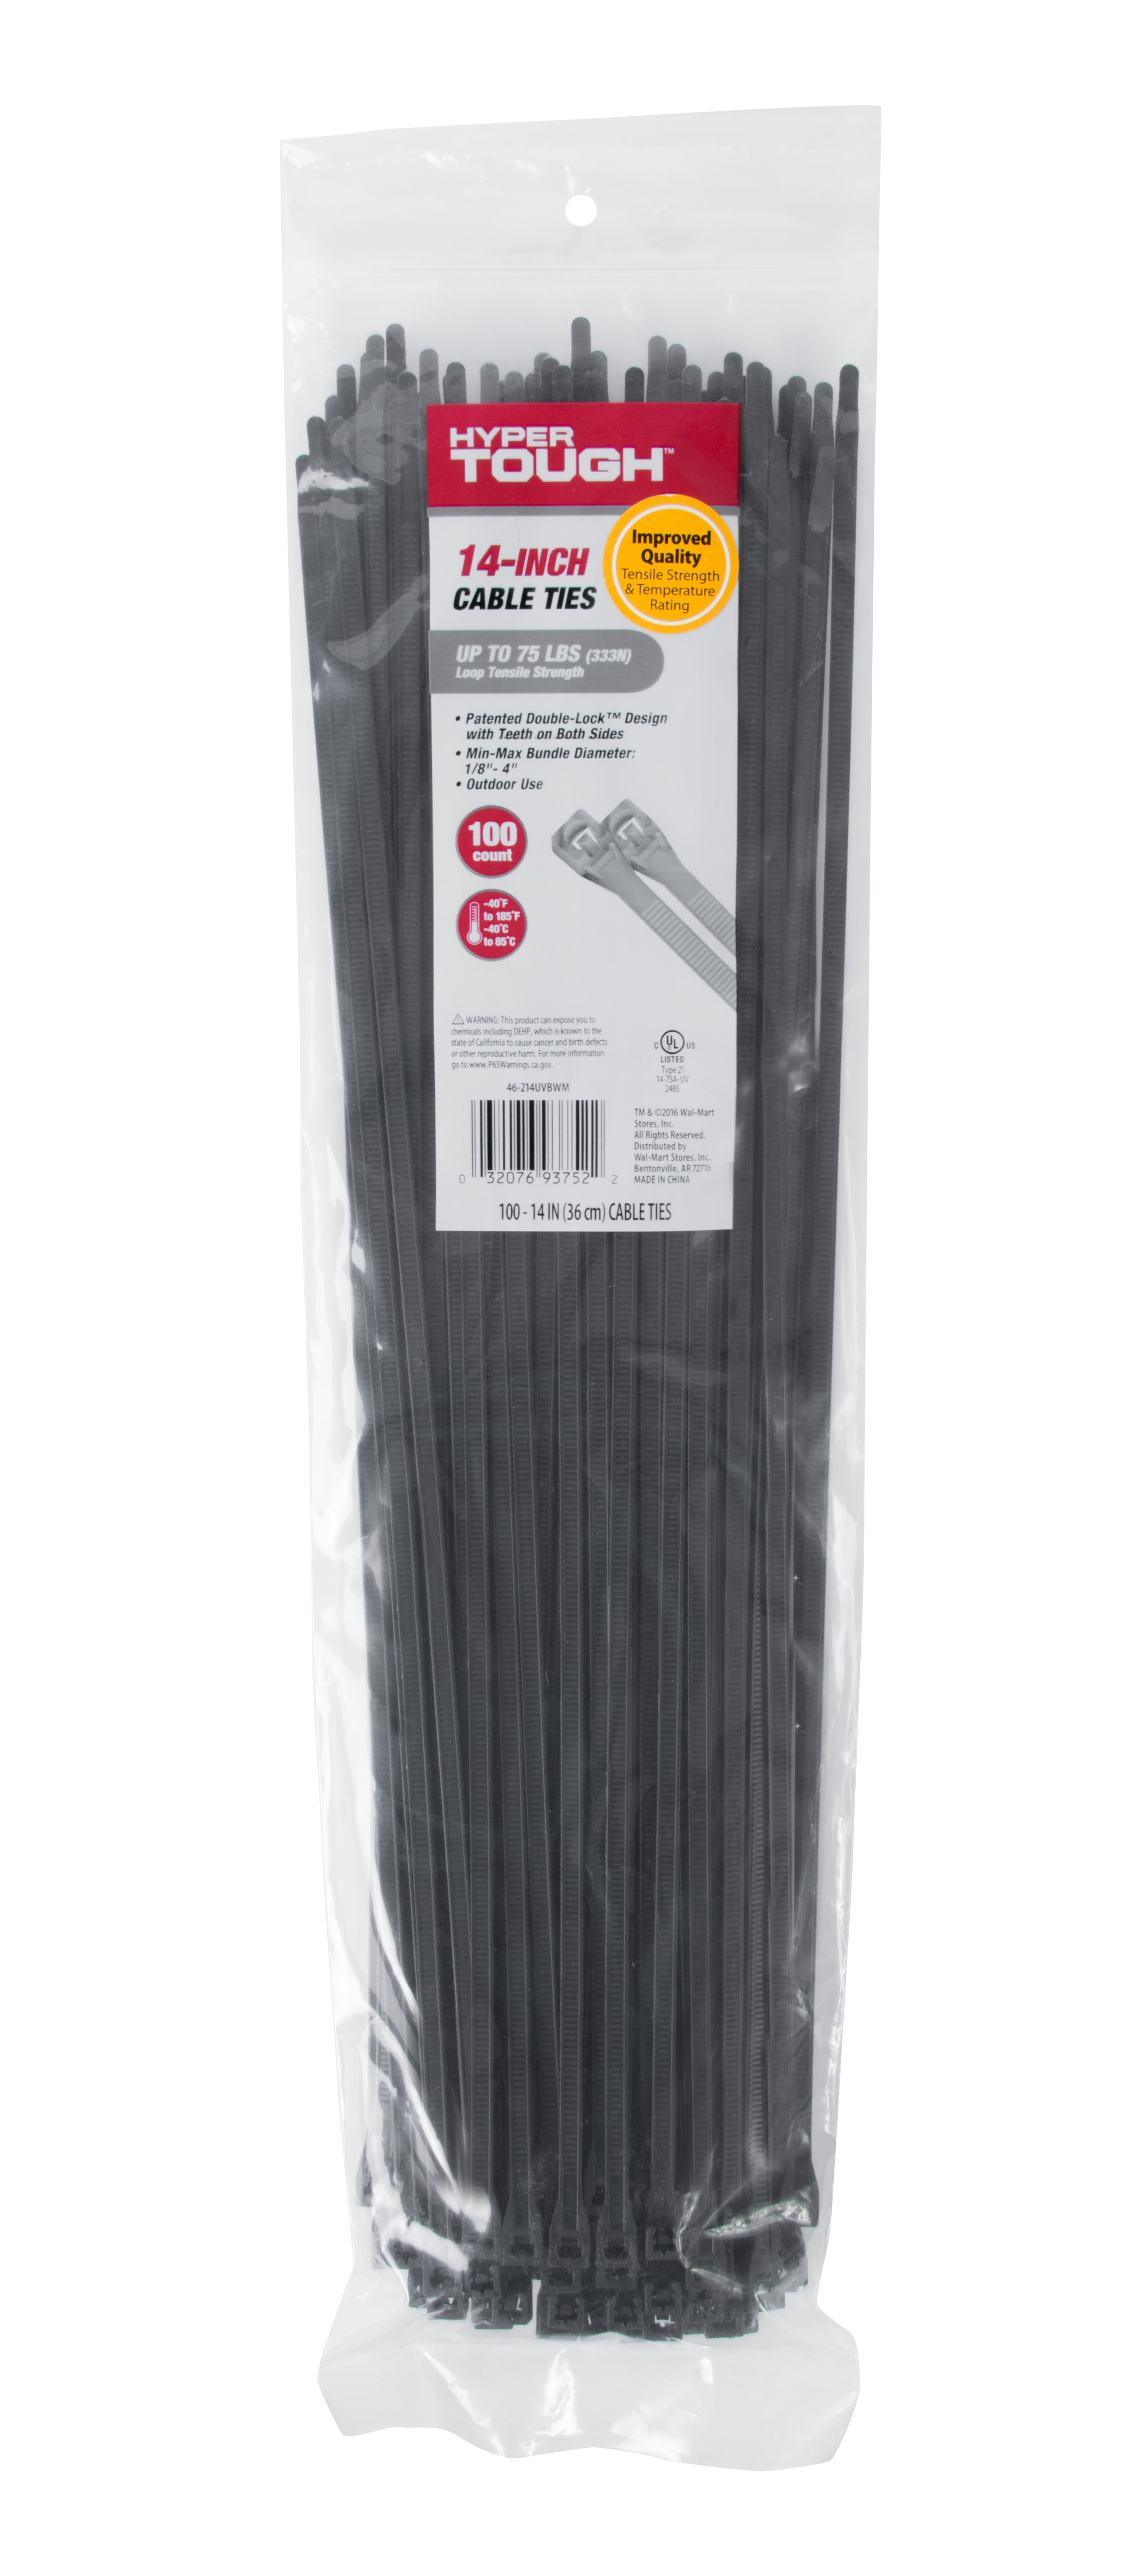 40 lb Tensile Strength CTS Brand Bag of 1,000 Black Nylon Cable Tie 14 Inch 